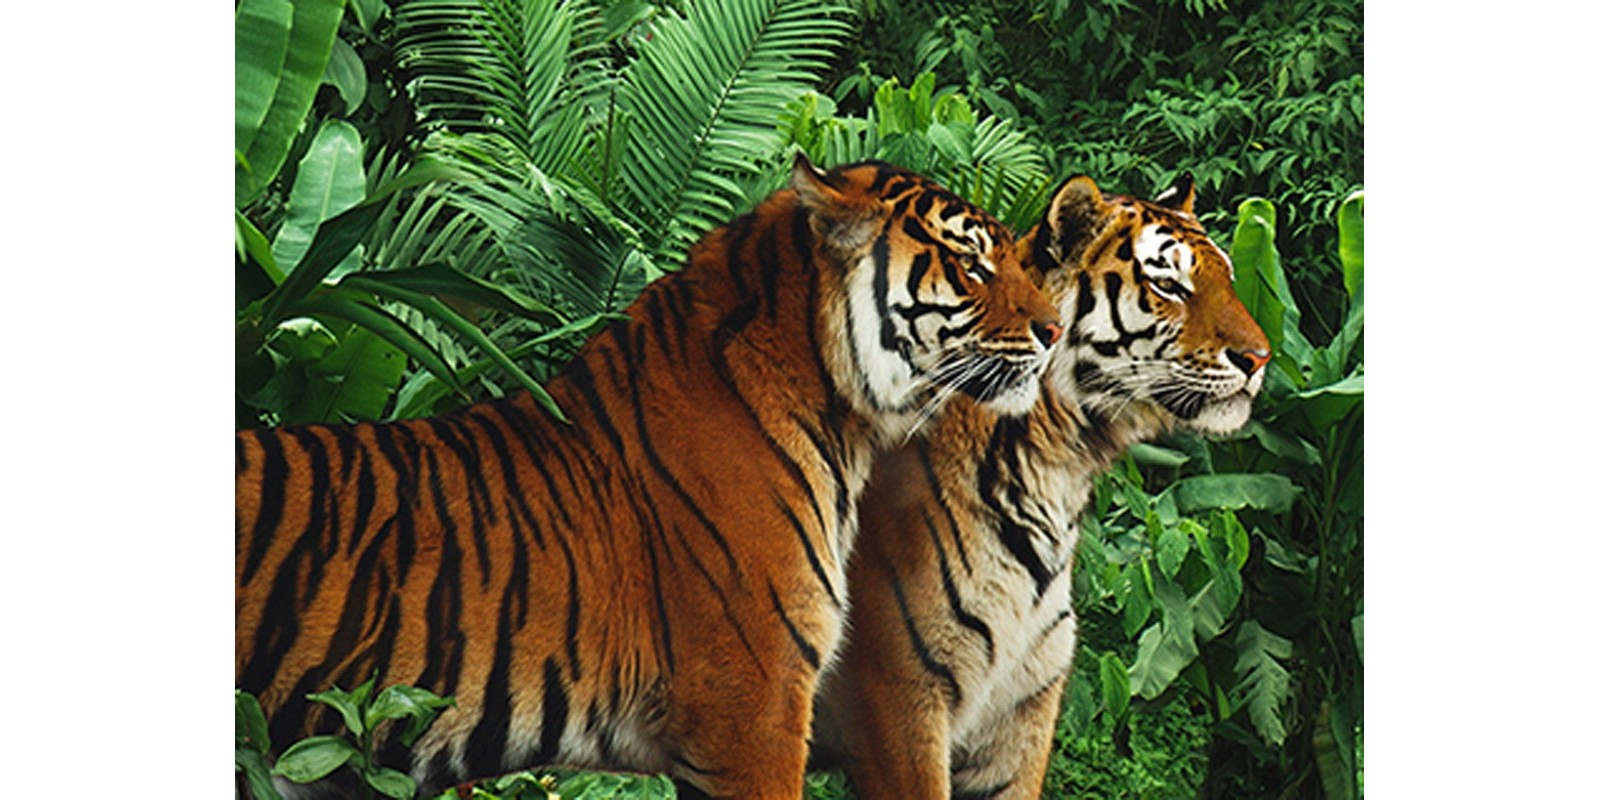 Pangea Images - Two Bengal Tigers